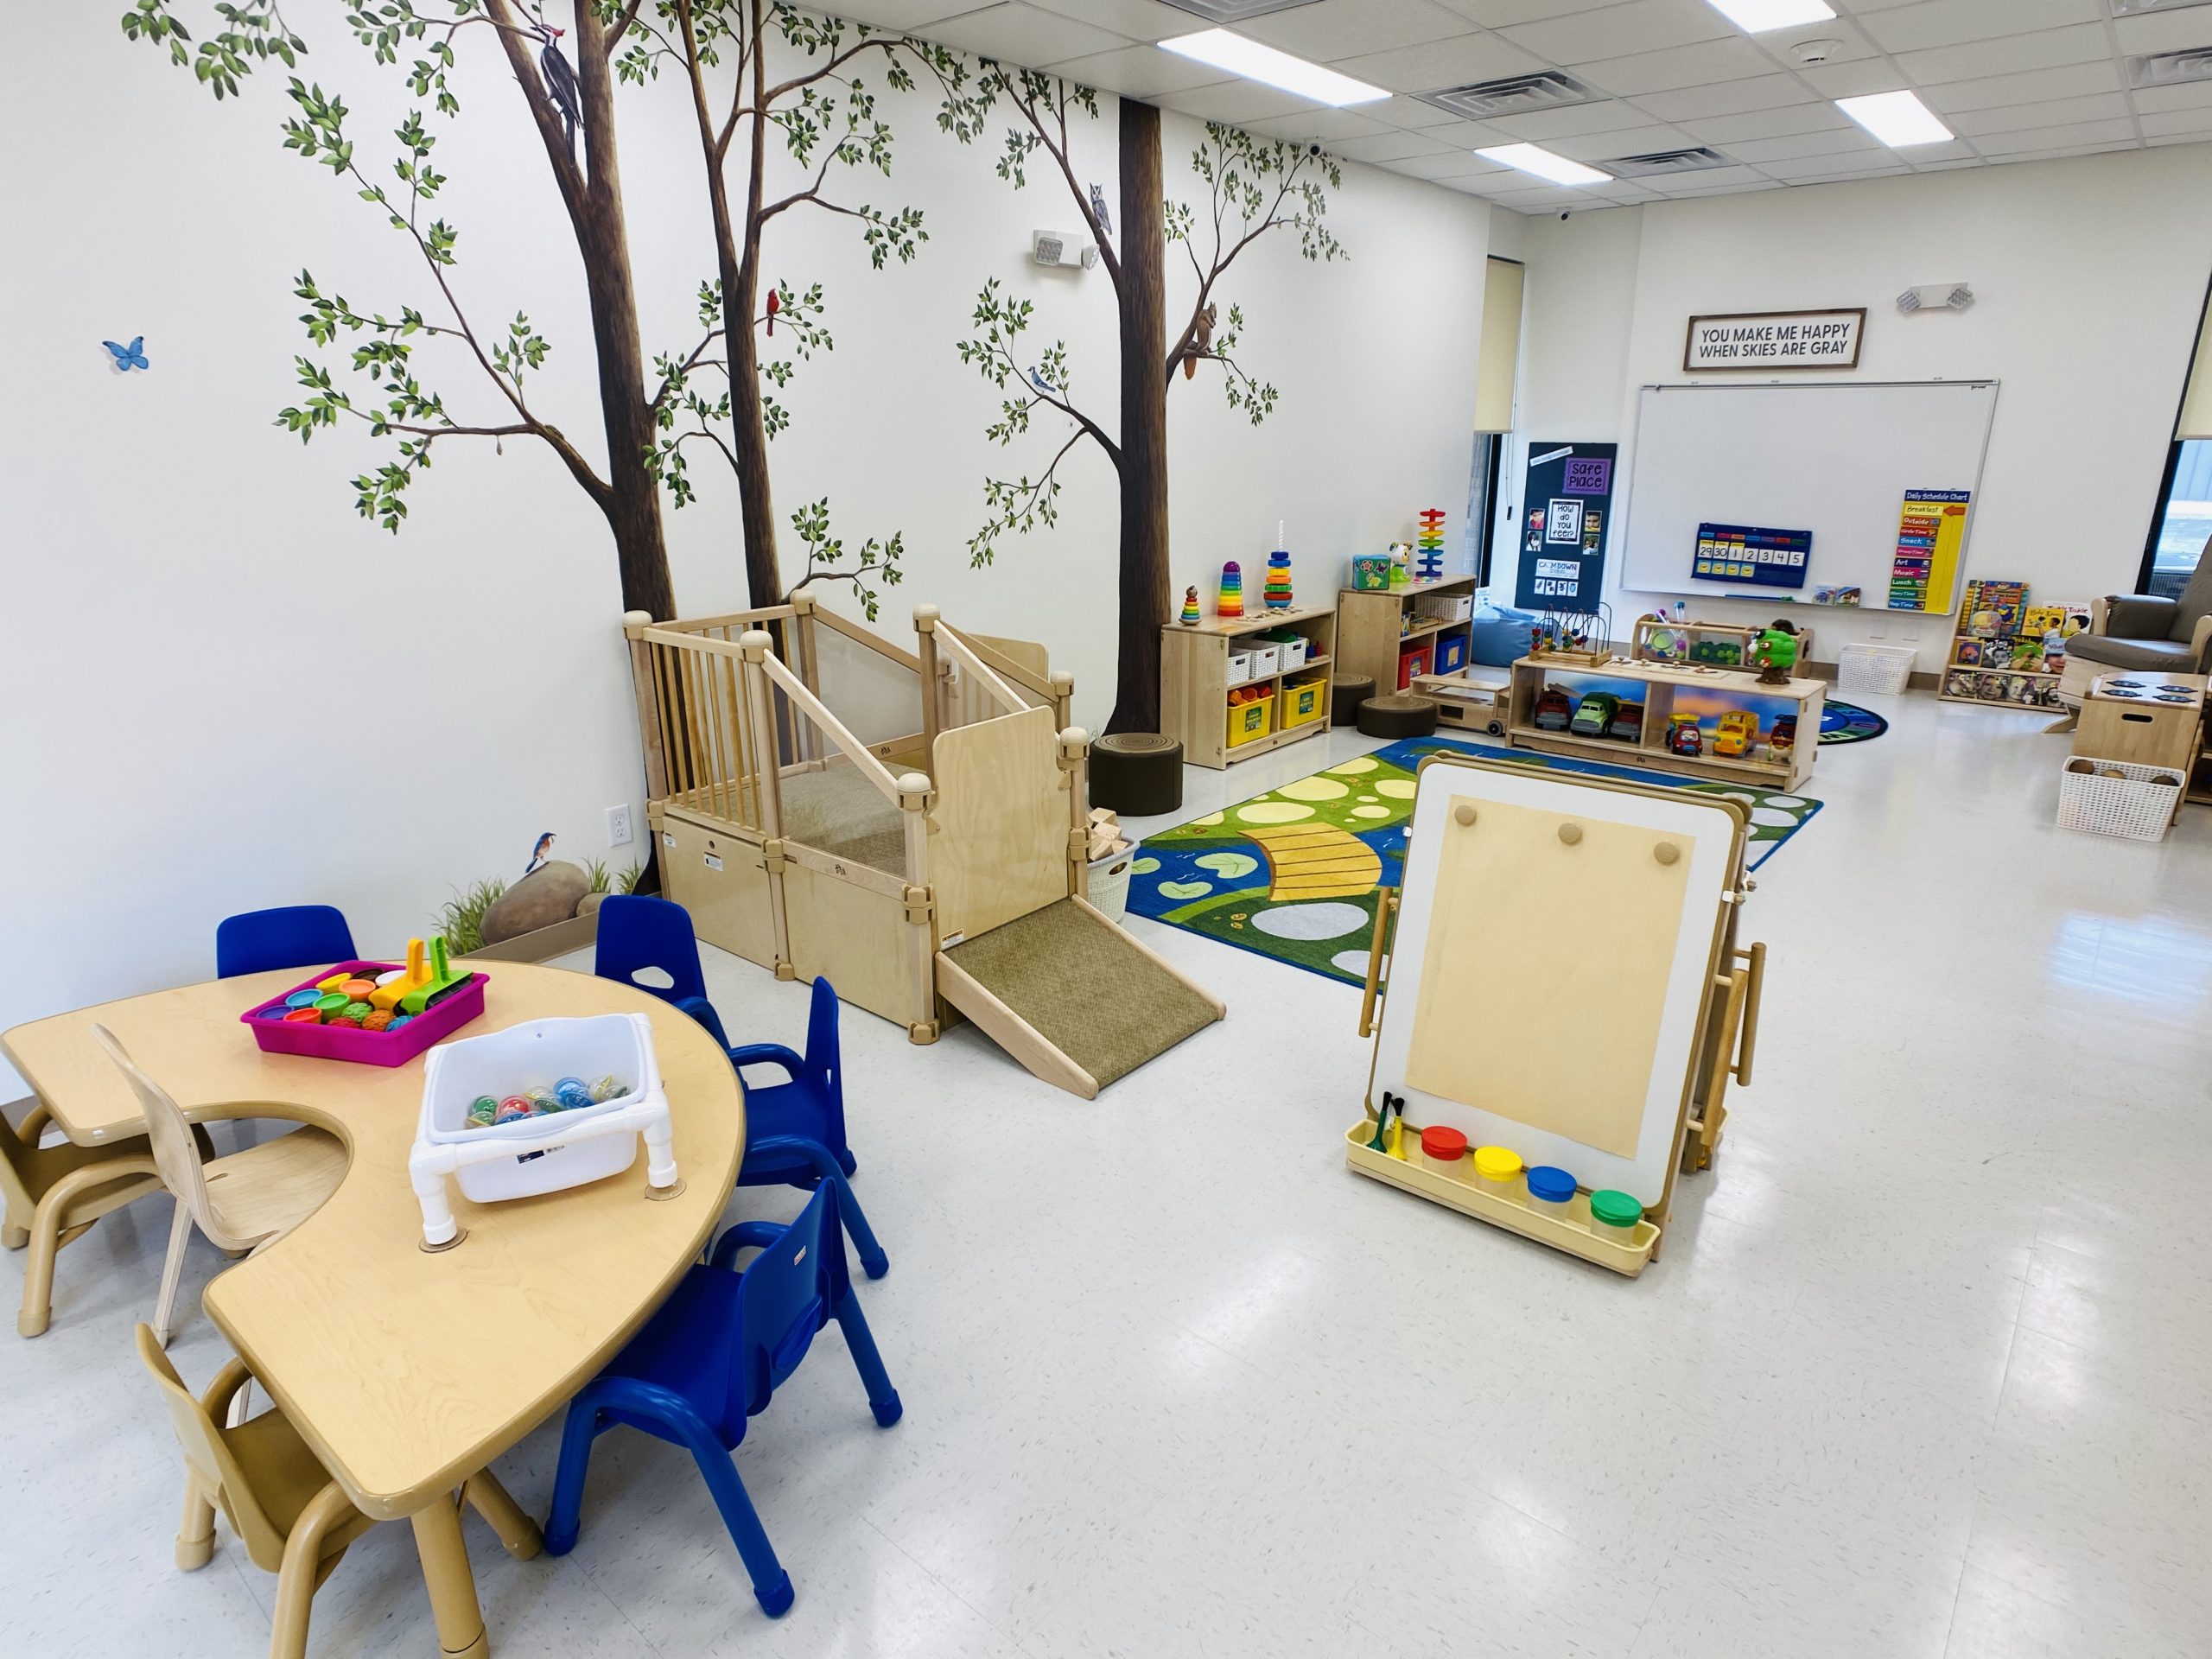 children's learning area - tables